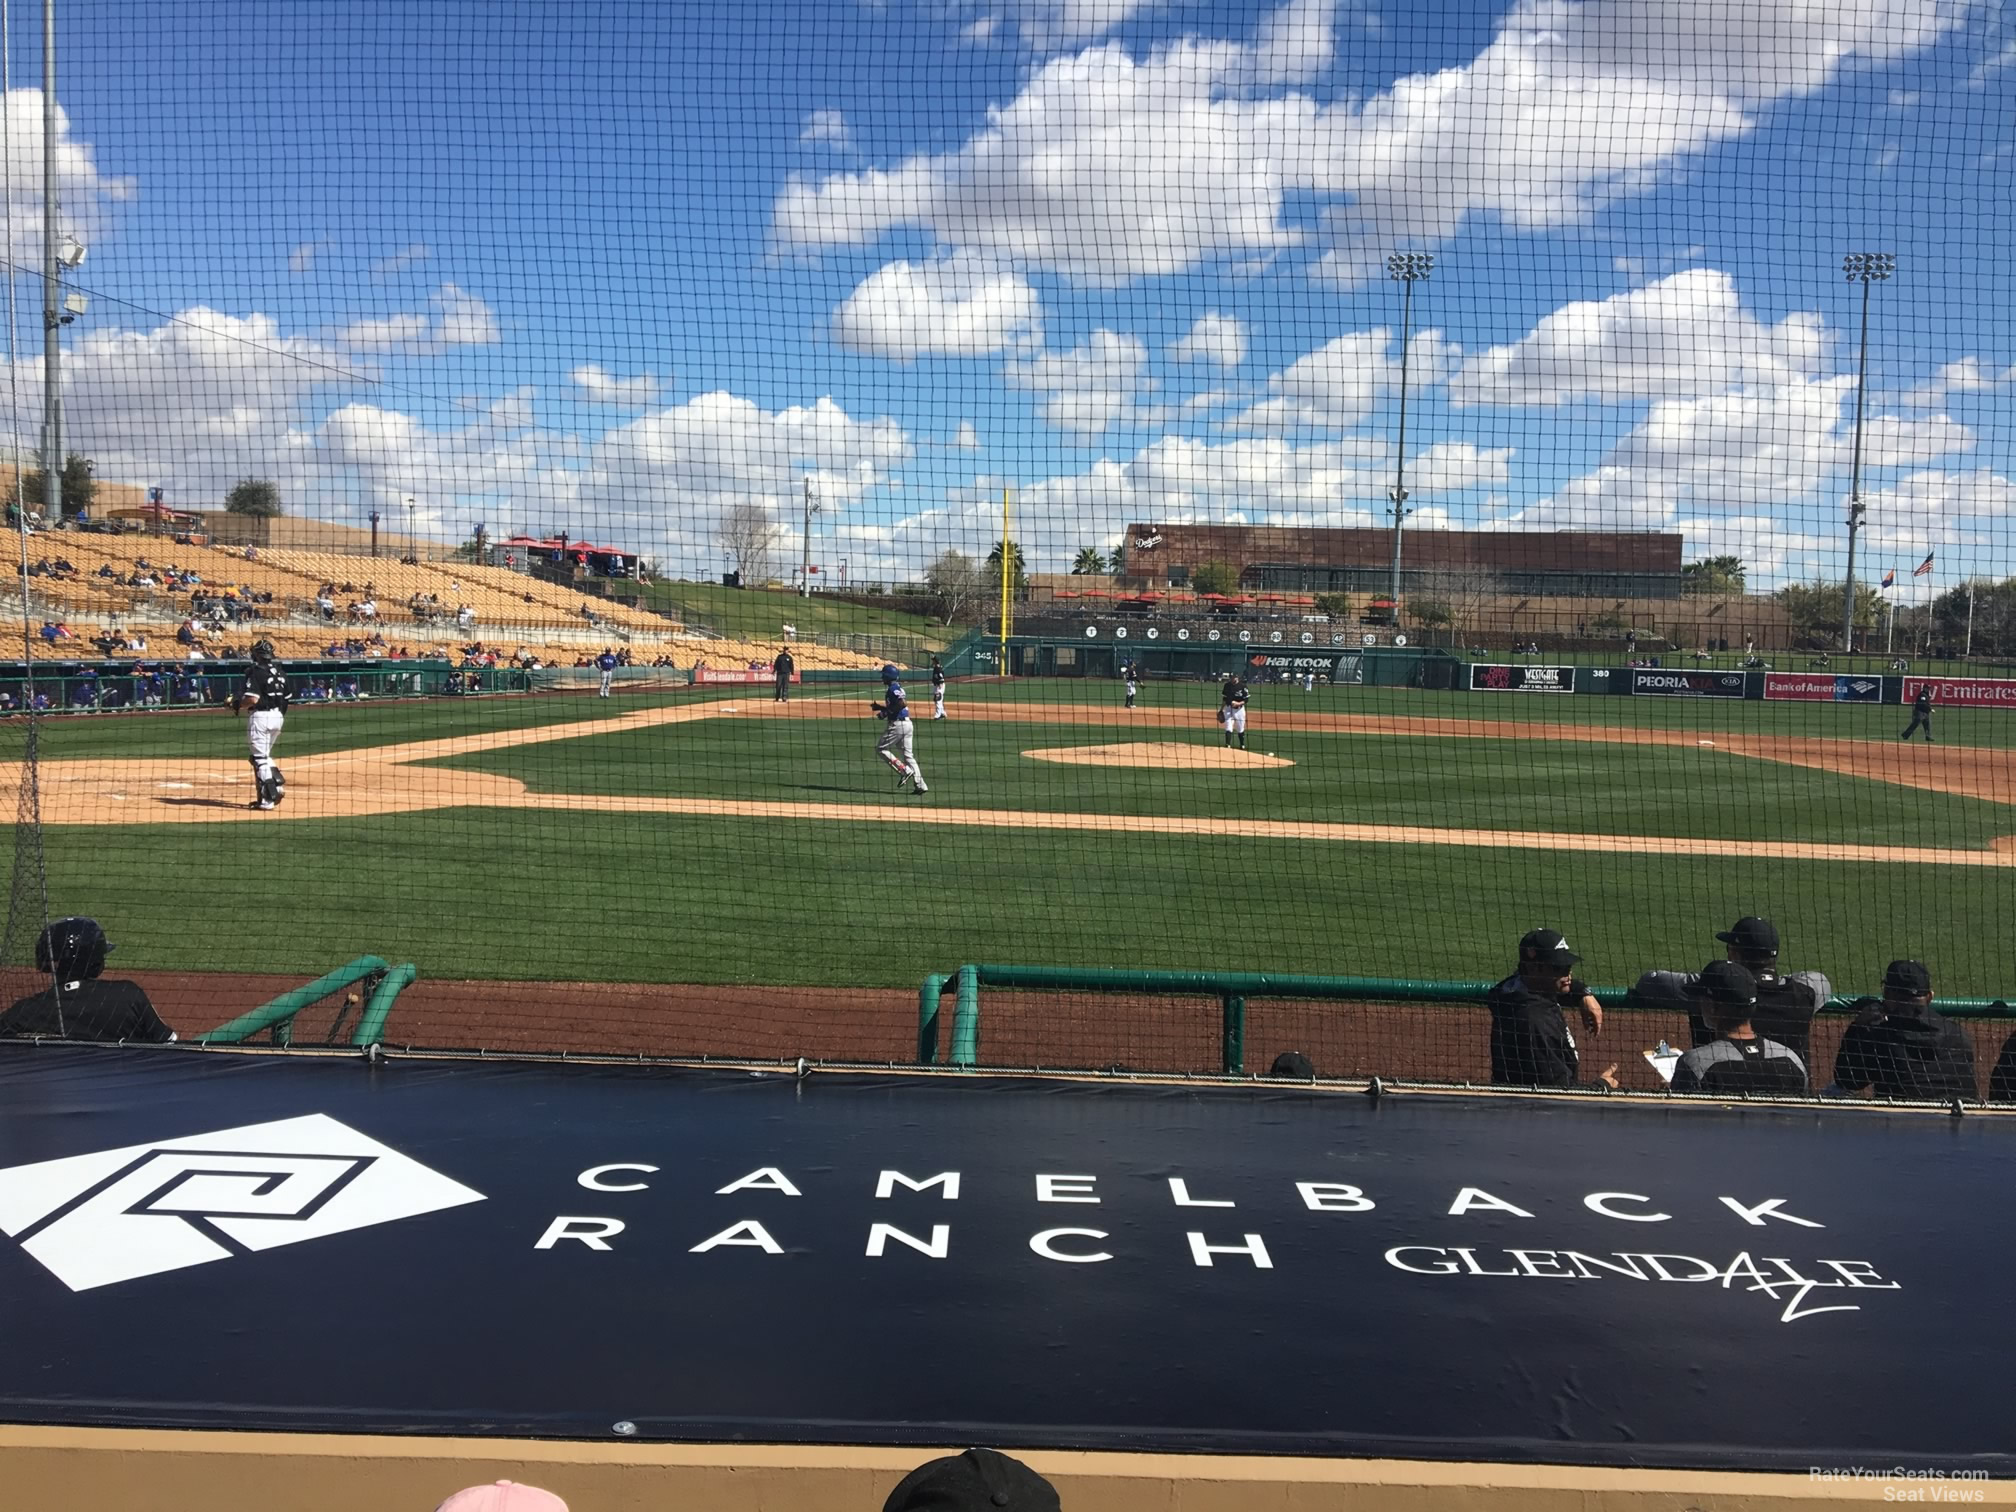 section 10, row 6 seat view  - camelback ranch